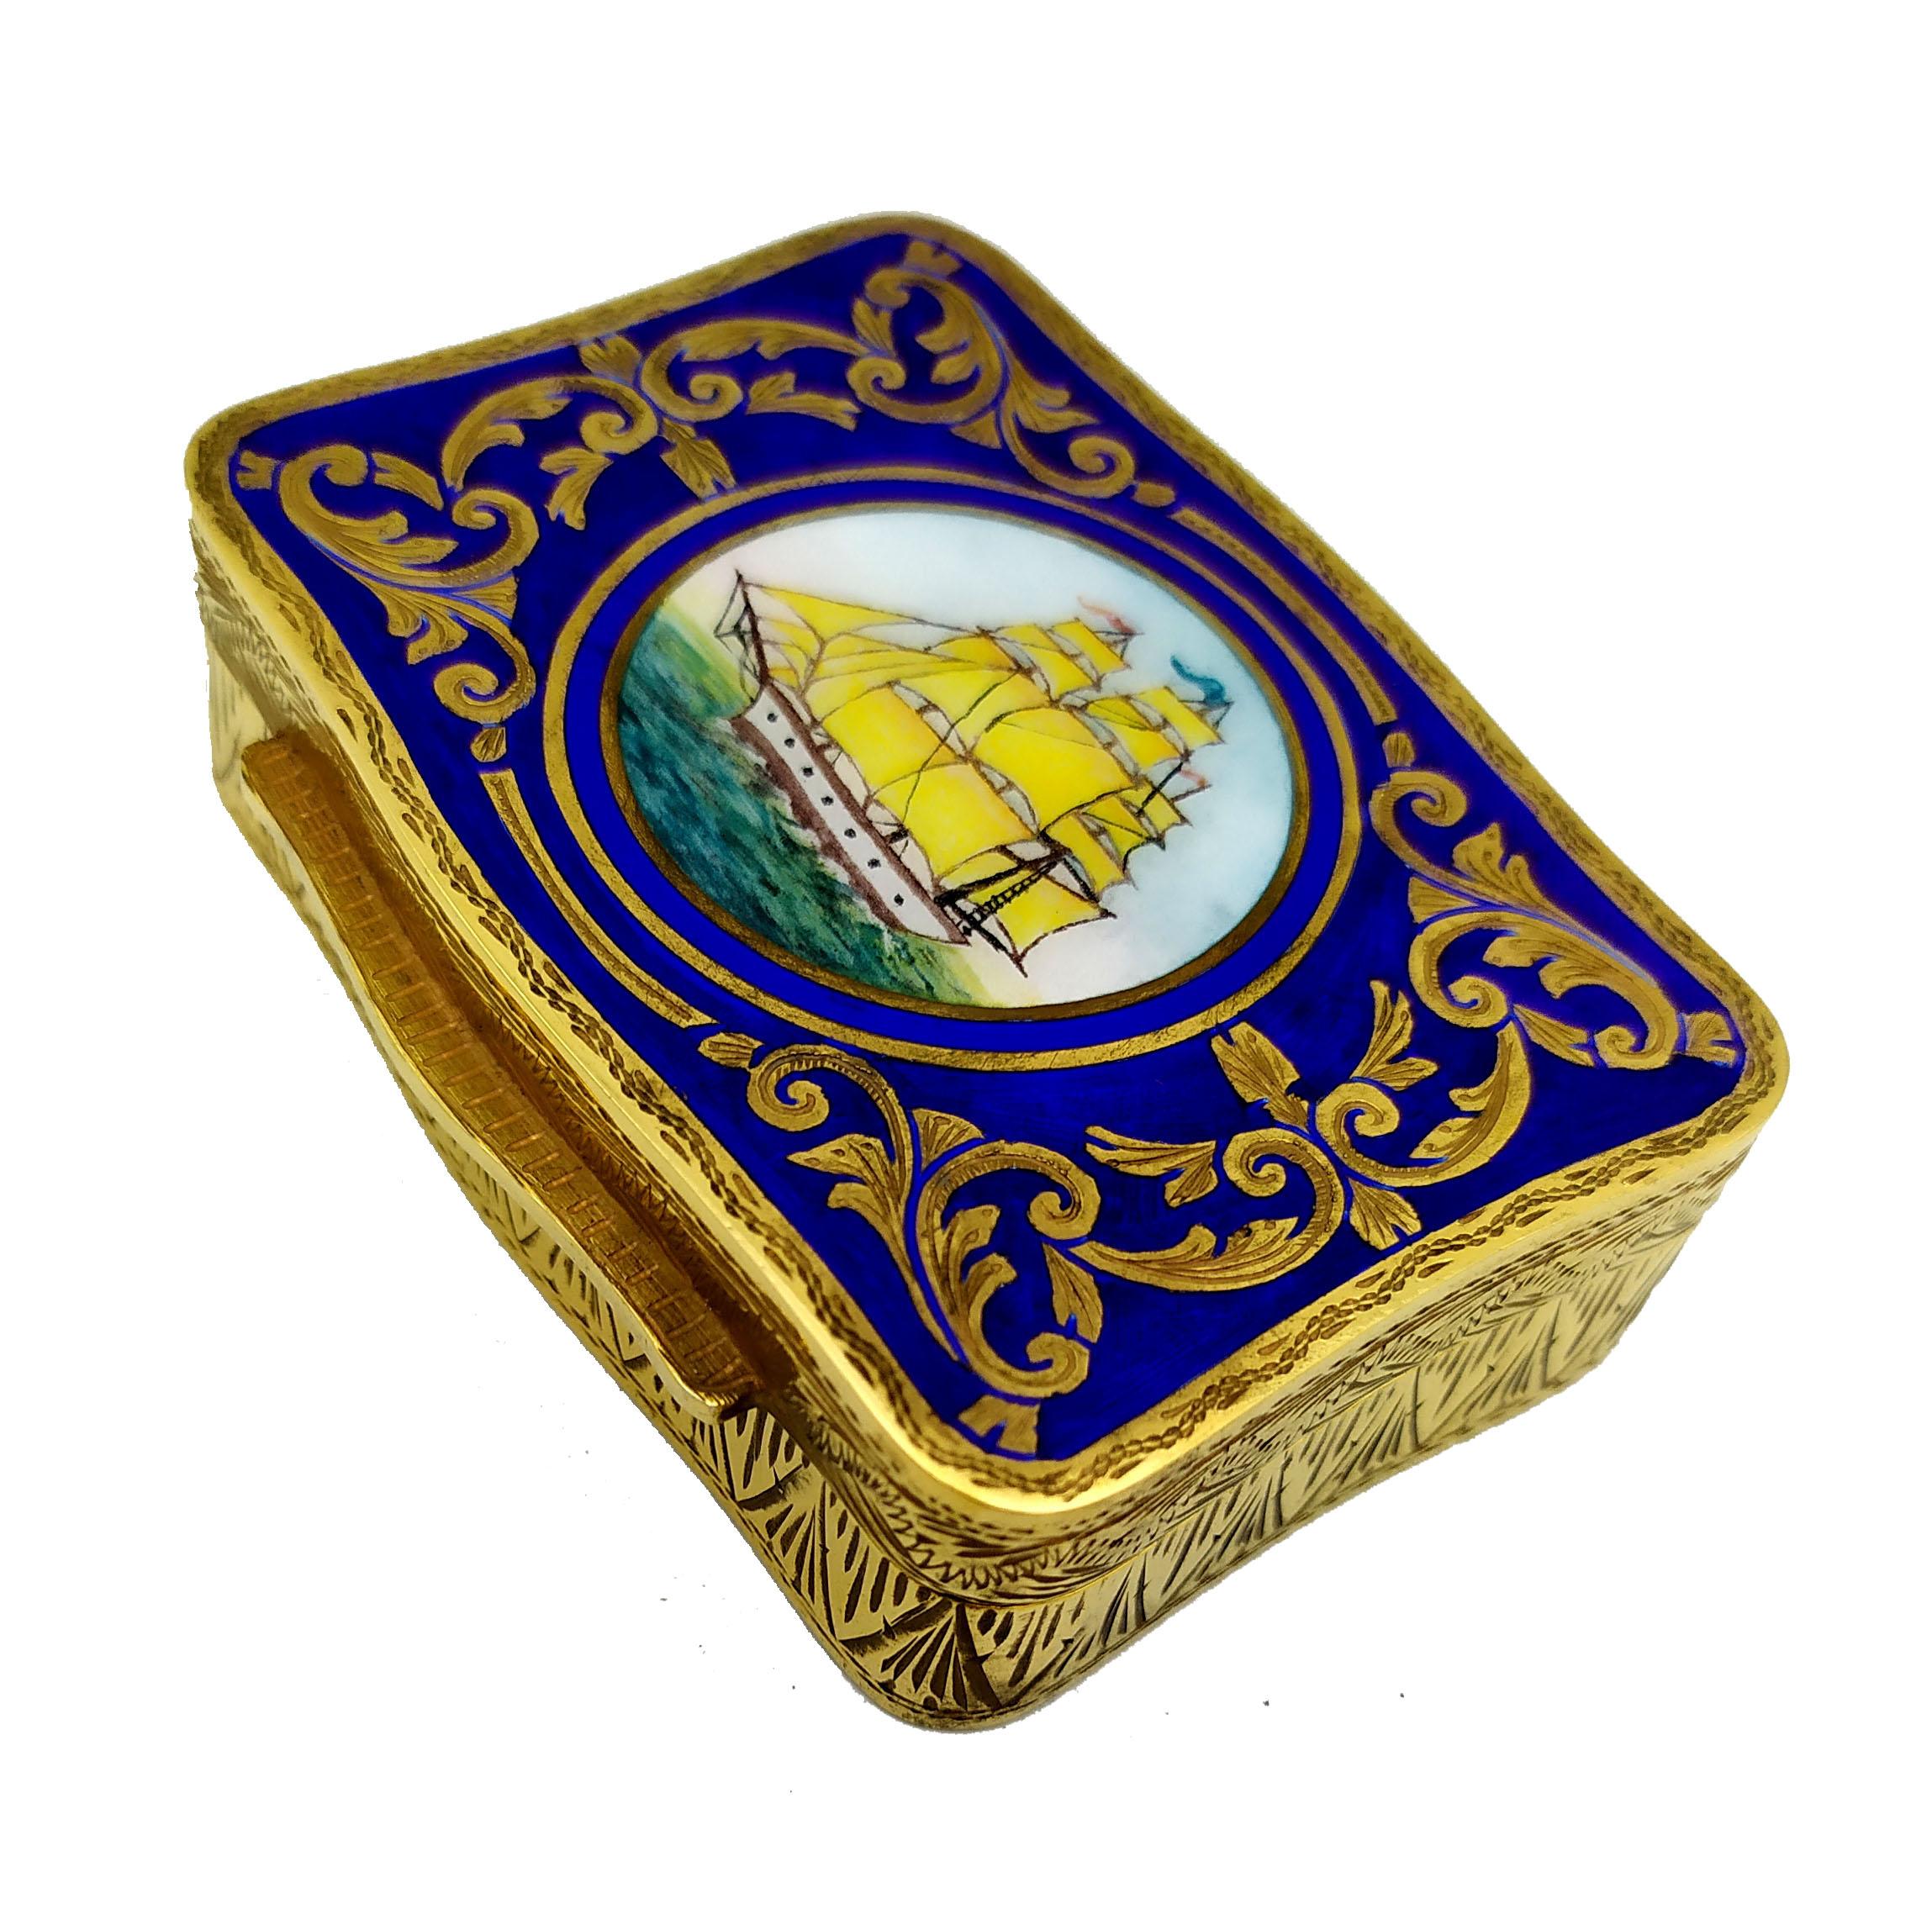 Shaped snuffbox in 925/1000 sterling silver gold plated with fired enamel inserted in a fine hand engraving and with round miniature diameter cm. 3.3 hand painted always with fire enamels depicting a sailing ship. Early 19th century Viennese Baroque